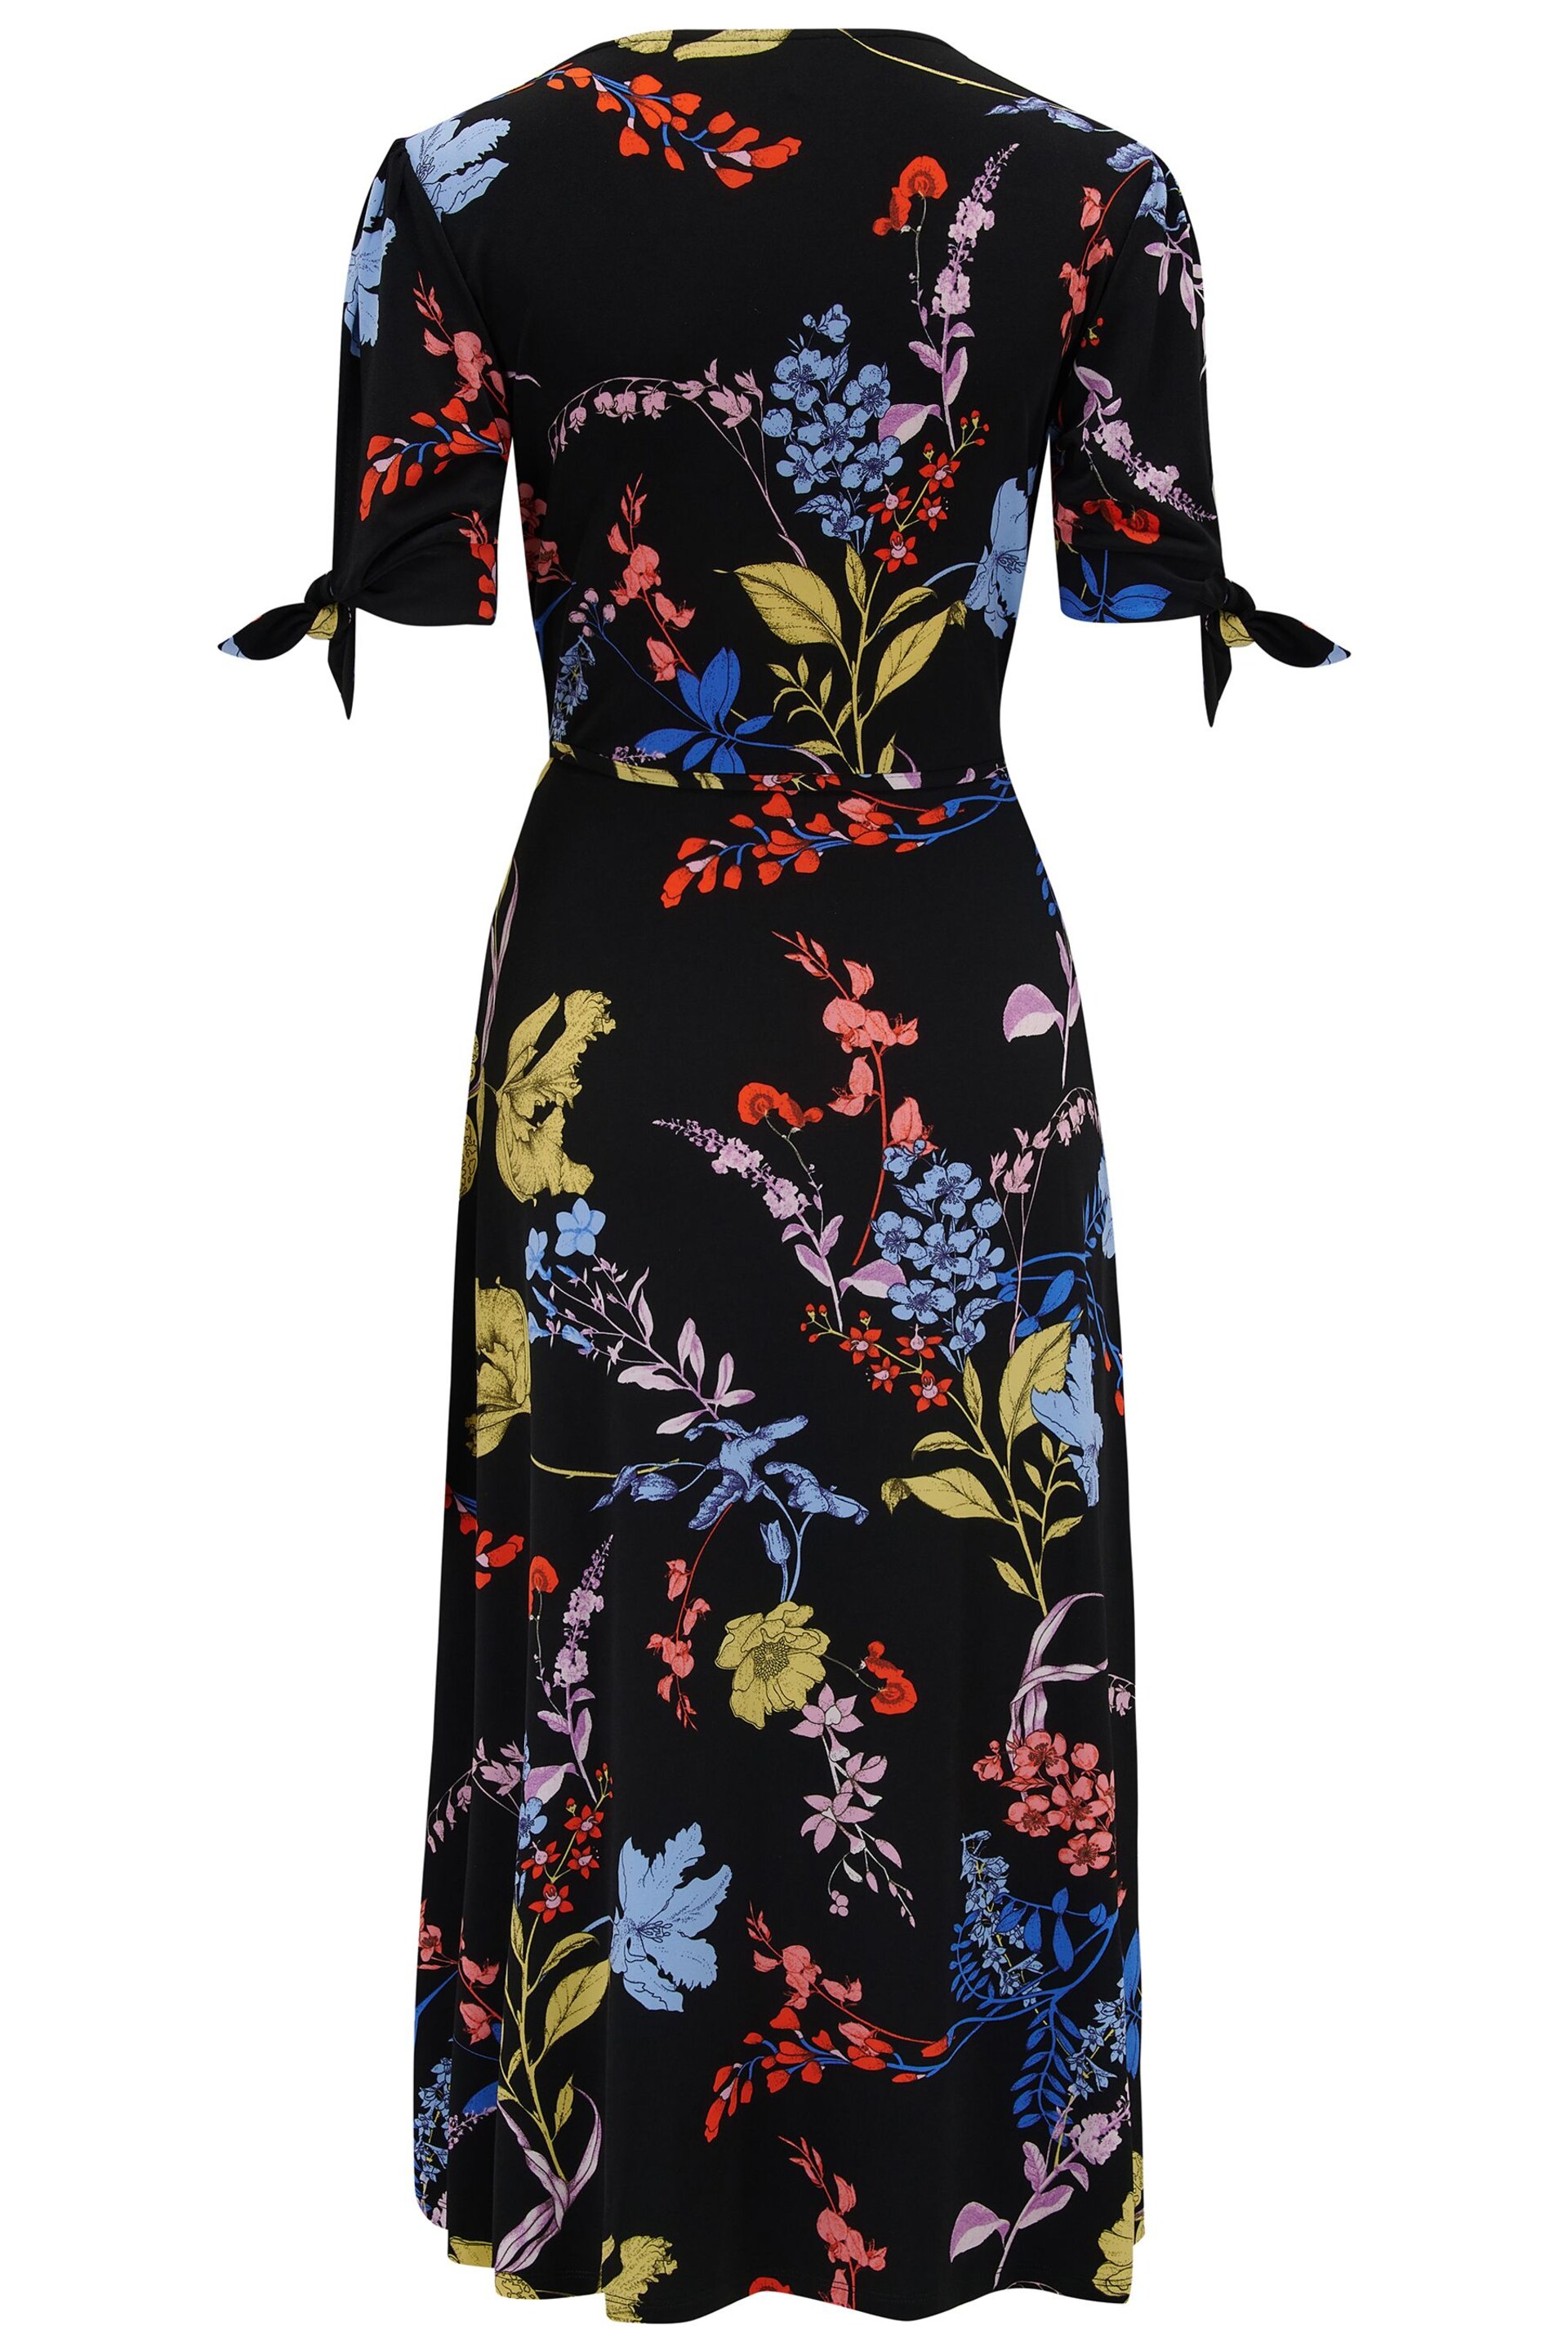 Pour Moi Black Floral Bella Slinky Recycled Stretch Tie Sleeve Midi Dress - Image 5 of 5